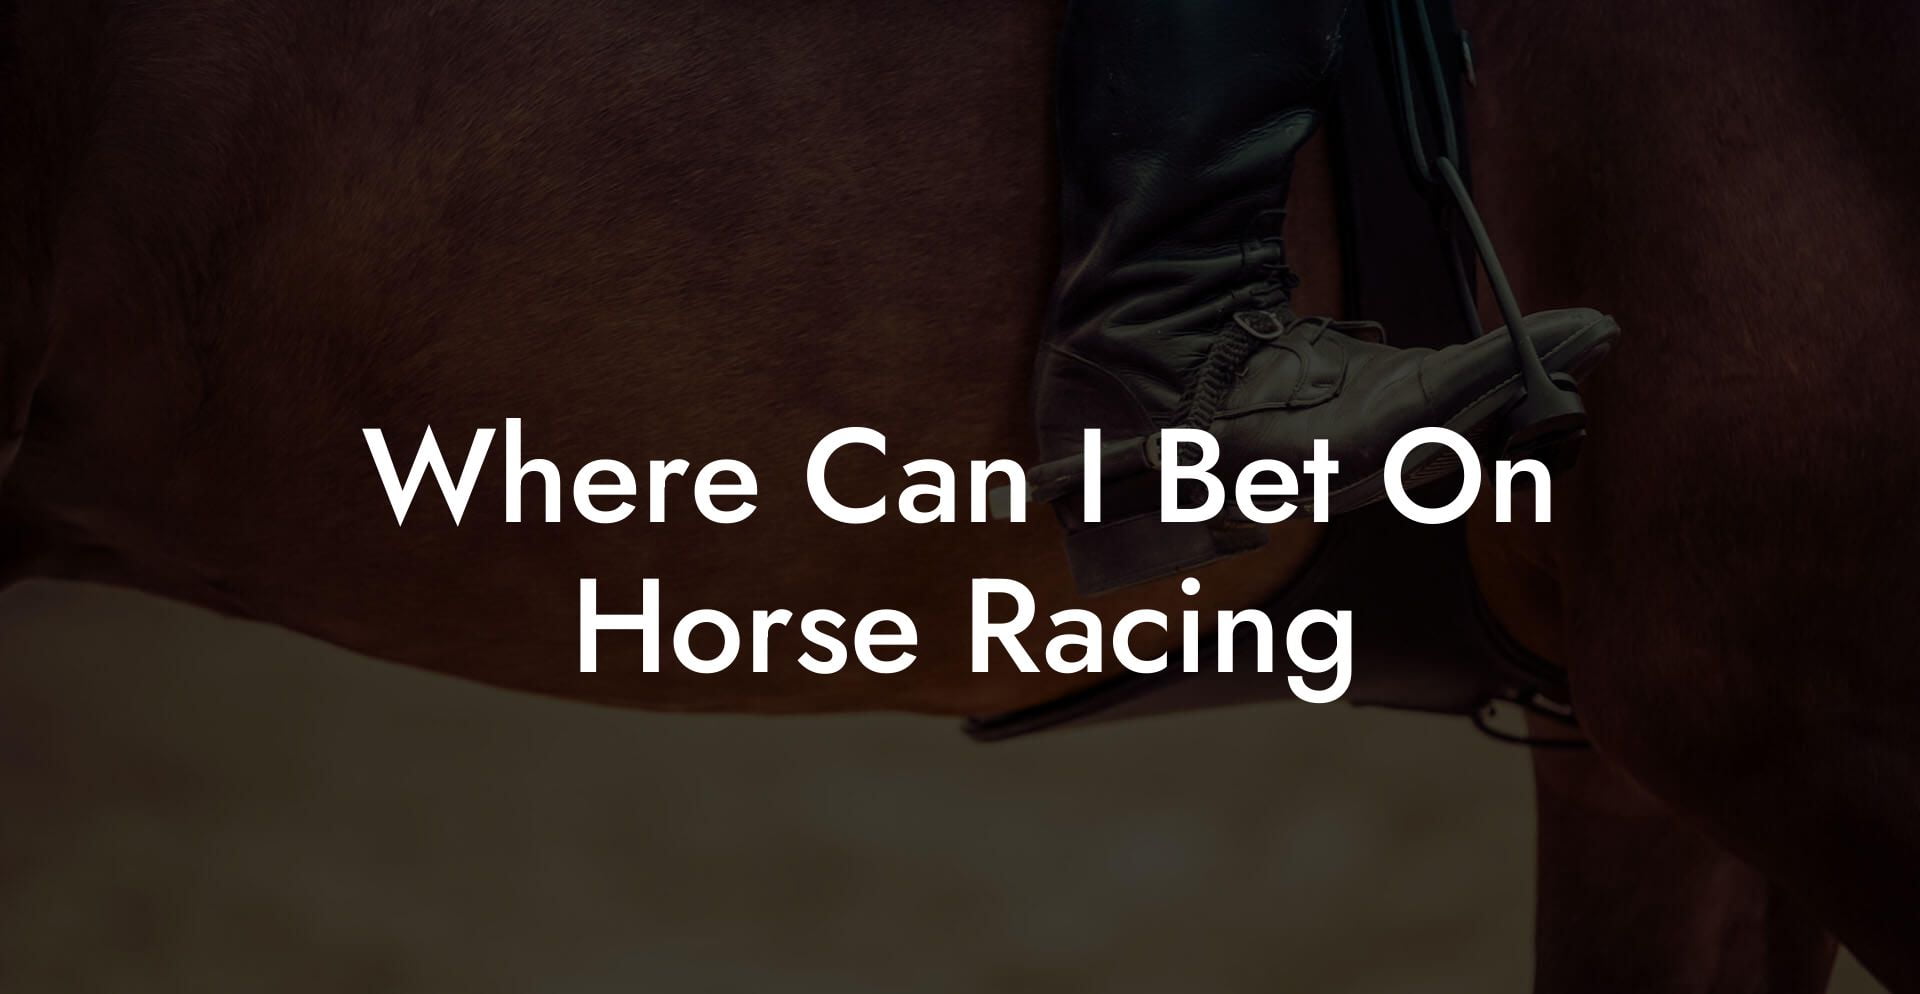 Where Can I Bet On Horse Racing